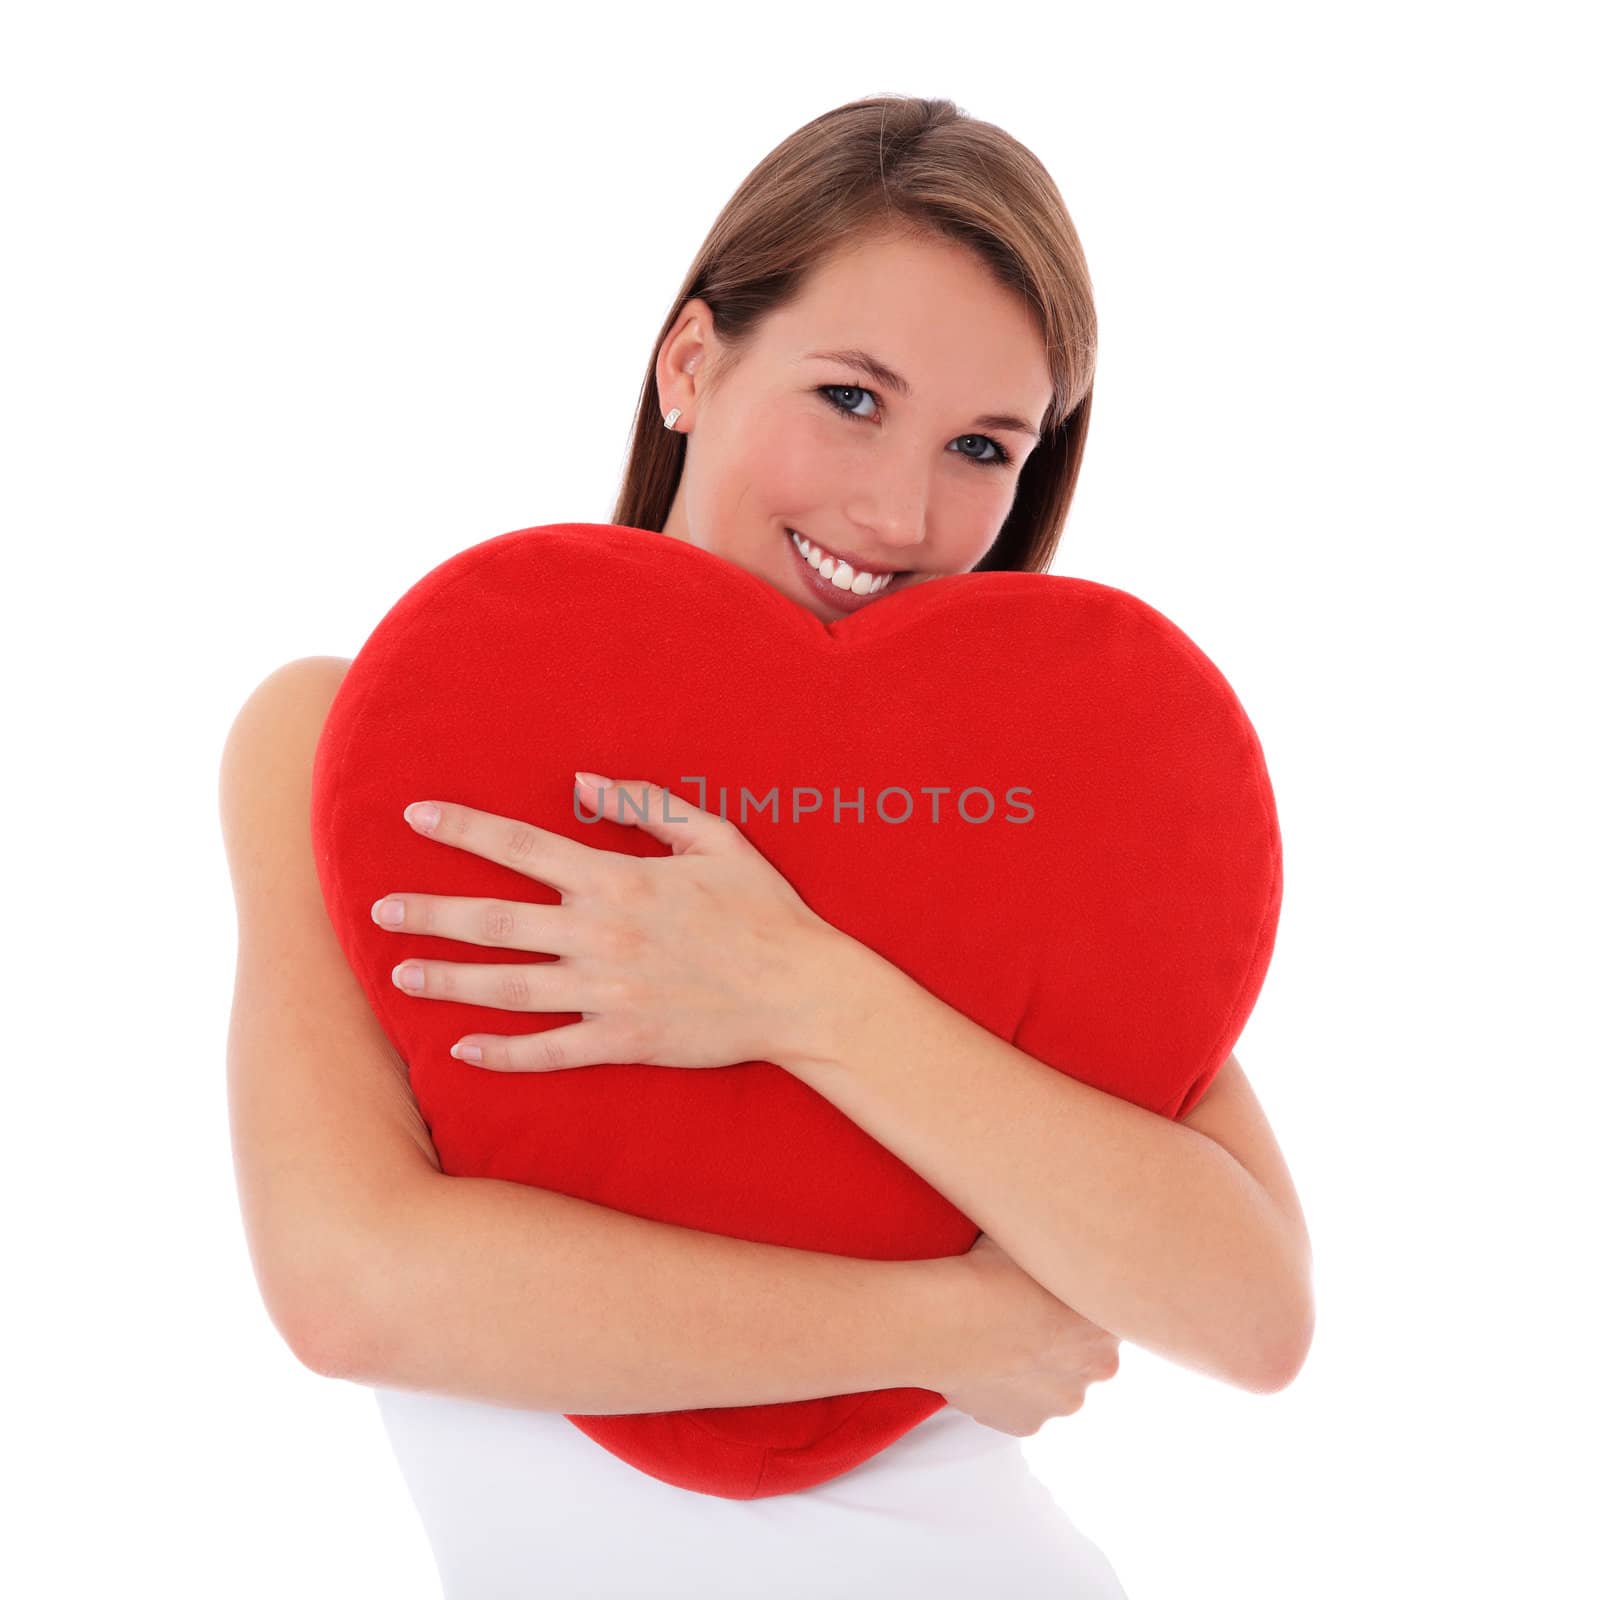 Attractive young woman hugs red heart-shaped pillow. All on white background.